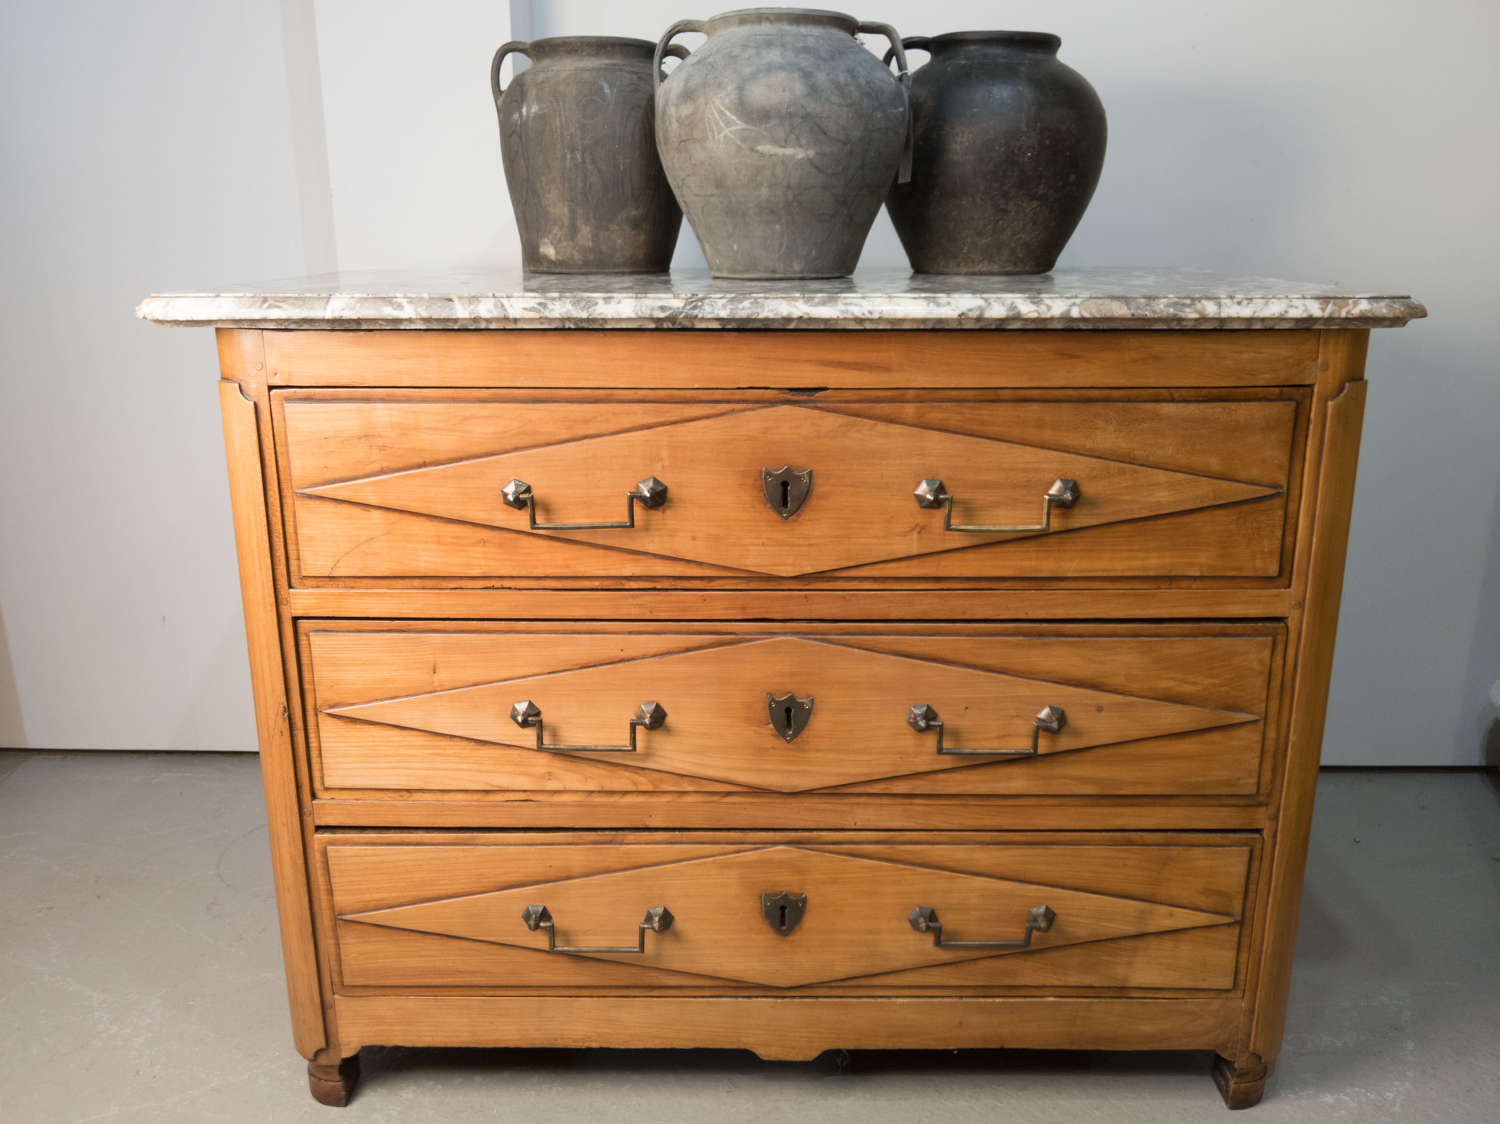 An Early 19th Century French Walnut Empire Commode